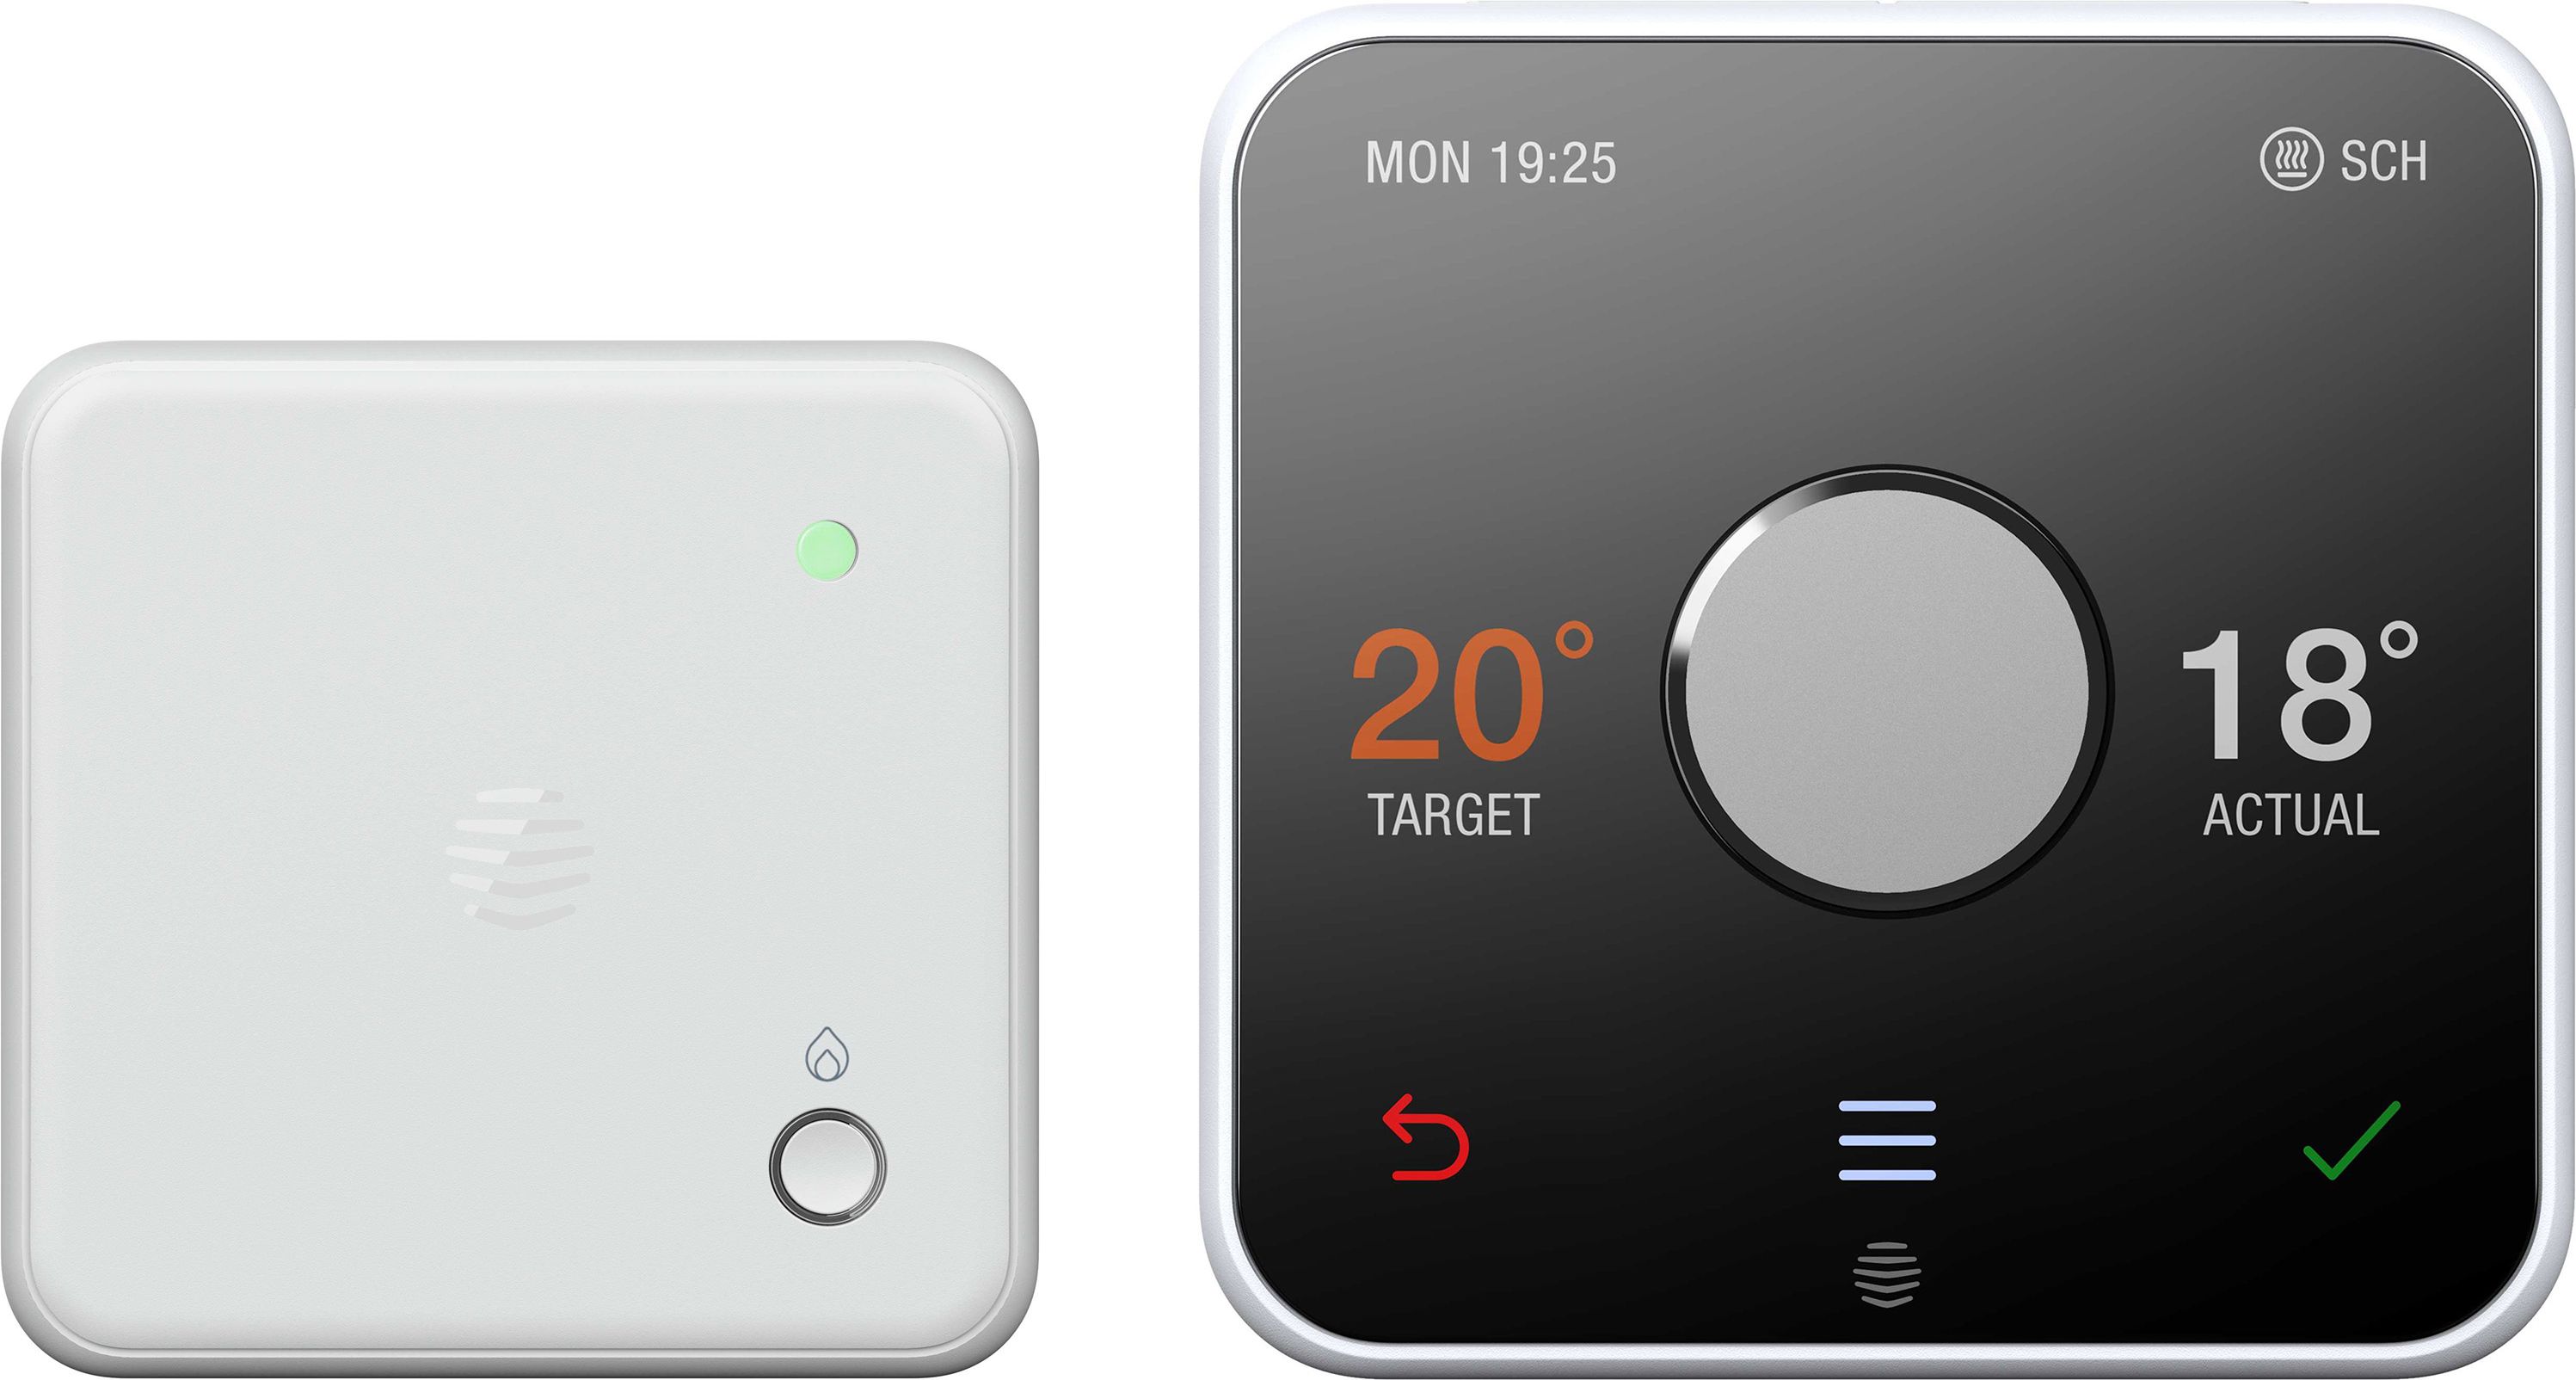 Hive Active Heating Thermostat Combi Boiler and Multizone - Requires Professional Install - White